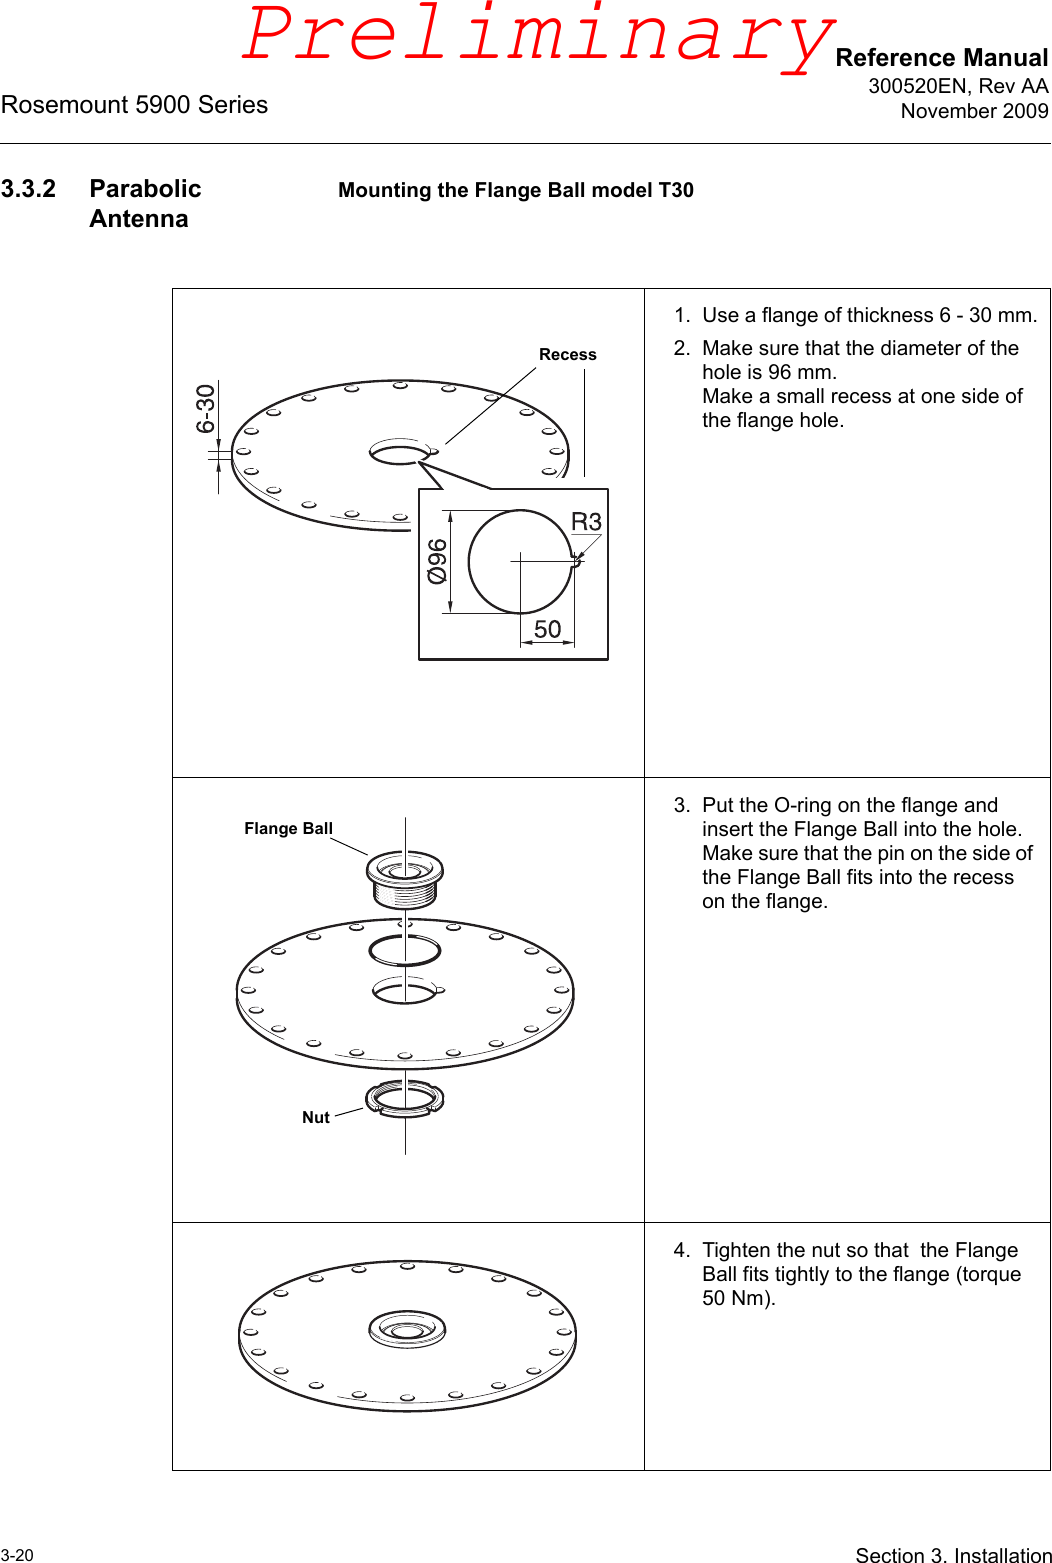 Reference Manual300520EN, Rev AANovember 2009Rosemount 5900 Series3-20 Section 3. Installation3.3.2 Parabolic AntennaMounting the Flange Ball model T301. Use a flange of thickness 6 - 30 mm.2. Make sure that the diameter of the hole is 96 mm.Make a small recess at one side of the flange hole.3. Put the O-ring on the flange and insert the Flange Ball into the hole. Make sure that the pin on the side of the Flange Ball fits into the recess on the flange.4. Tighten the nut so that  the Flange Ball fits tightly to the flange (torque 50 Nm).RecessFlange BallNutPreliminary